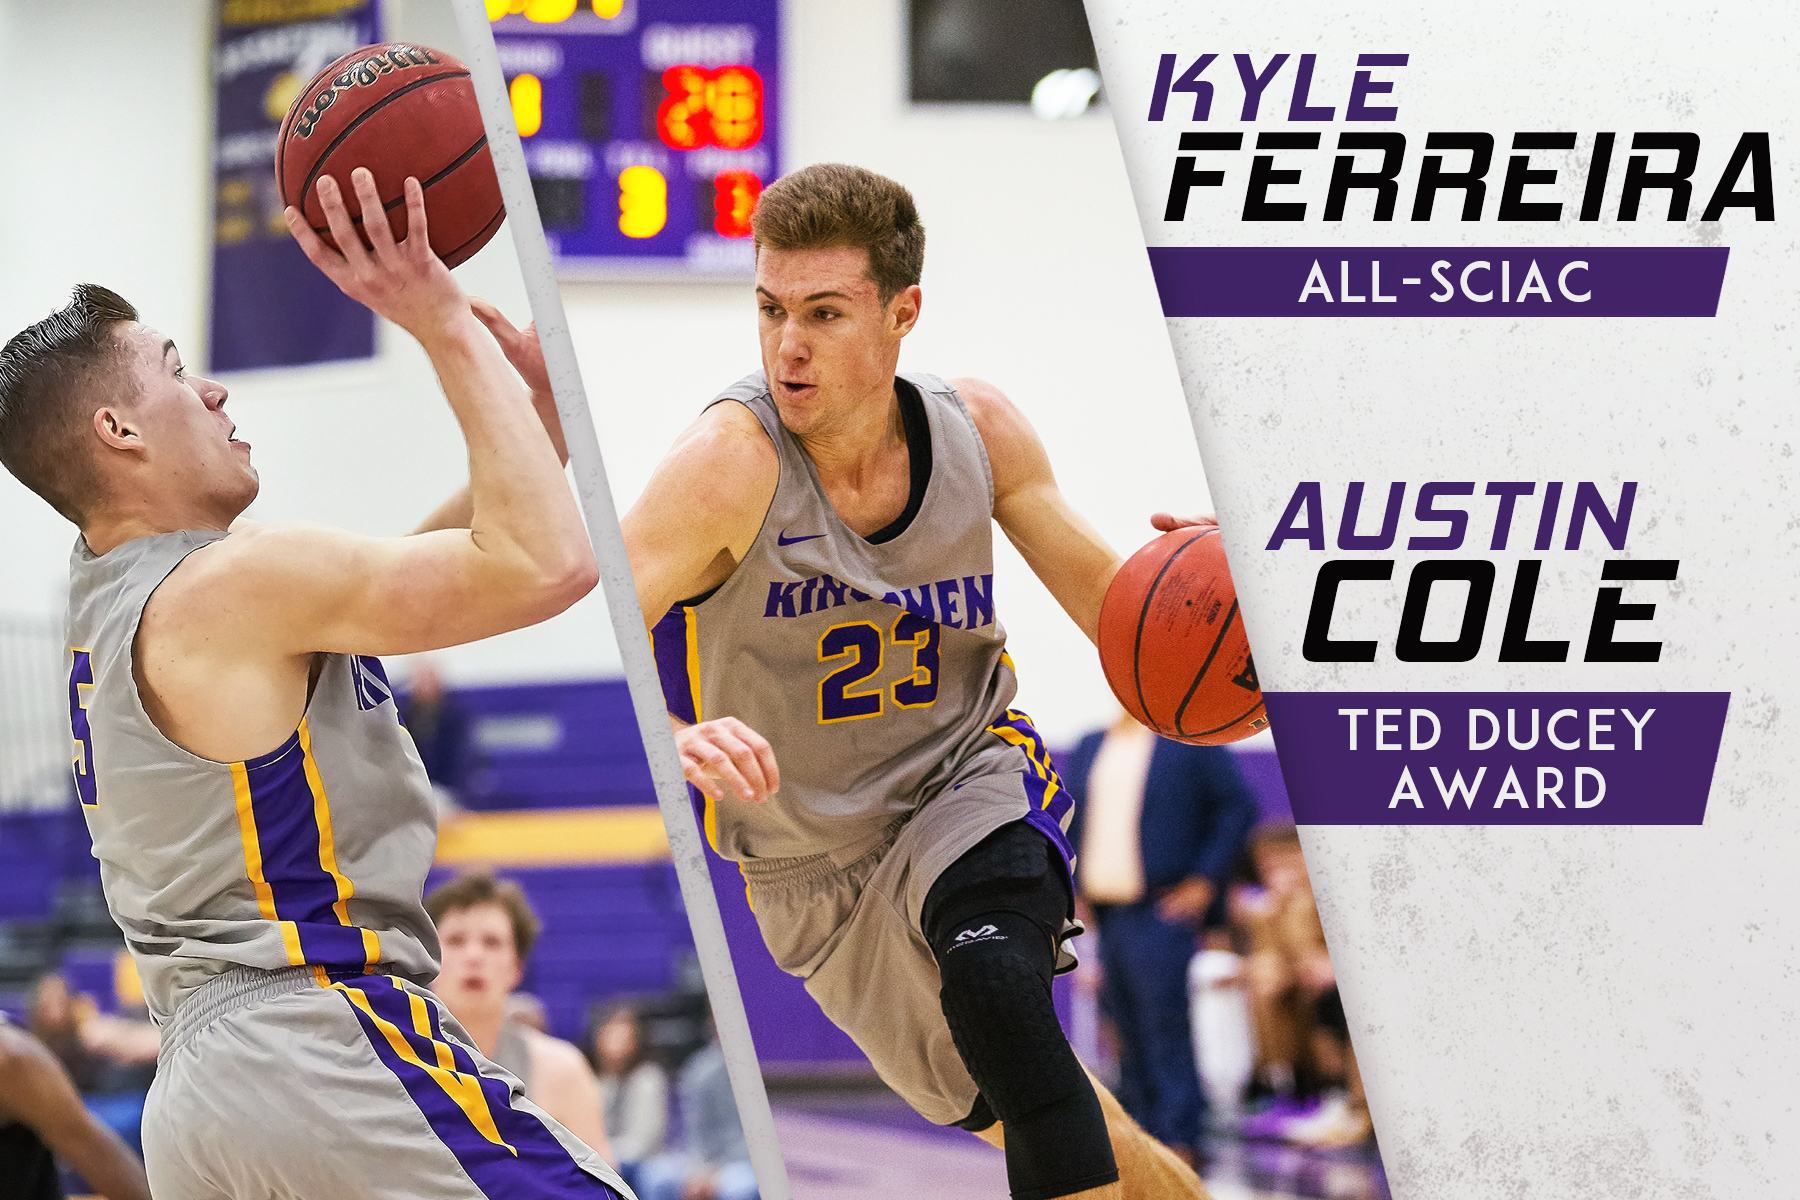 Ferreira Named Second Team All-SCIAC; Cole Earns Ted Ducey Award